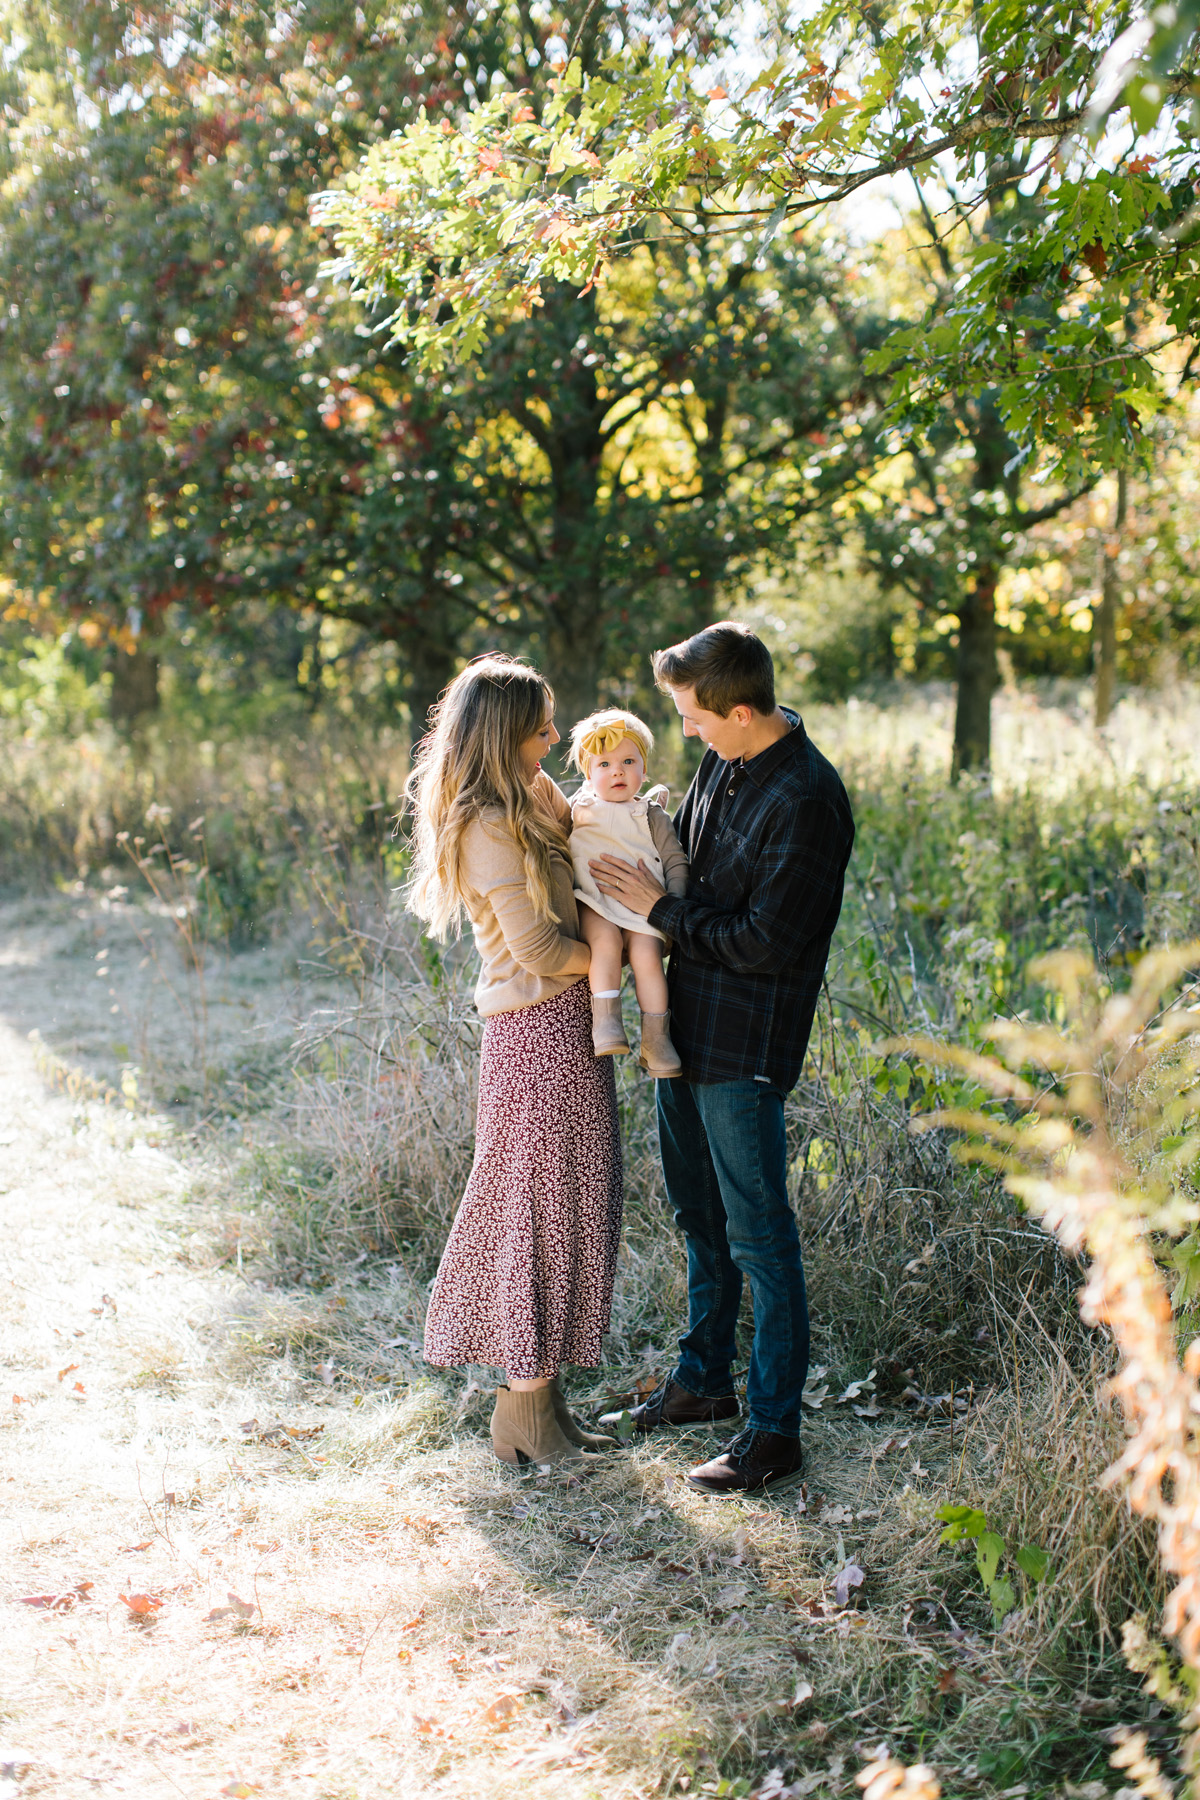 Elle Baker photography captures adorable family of three 